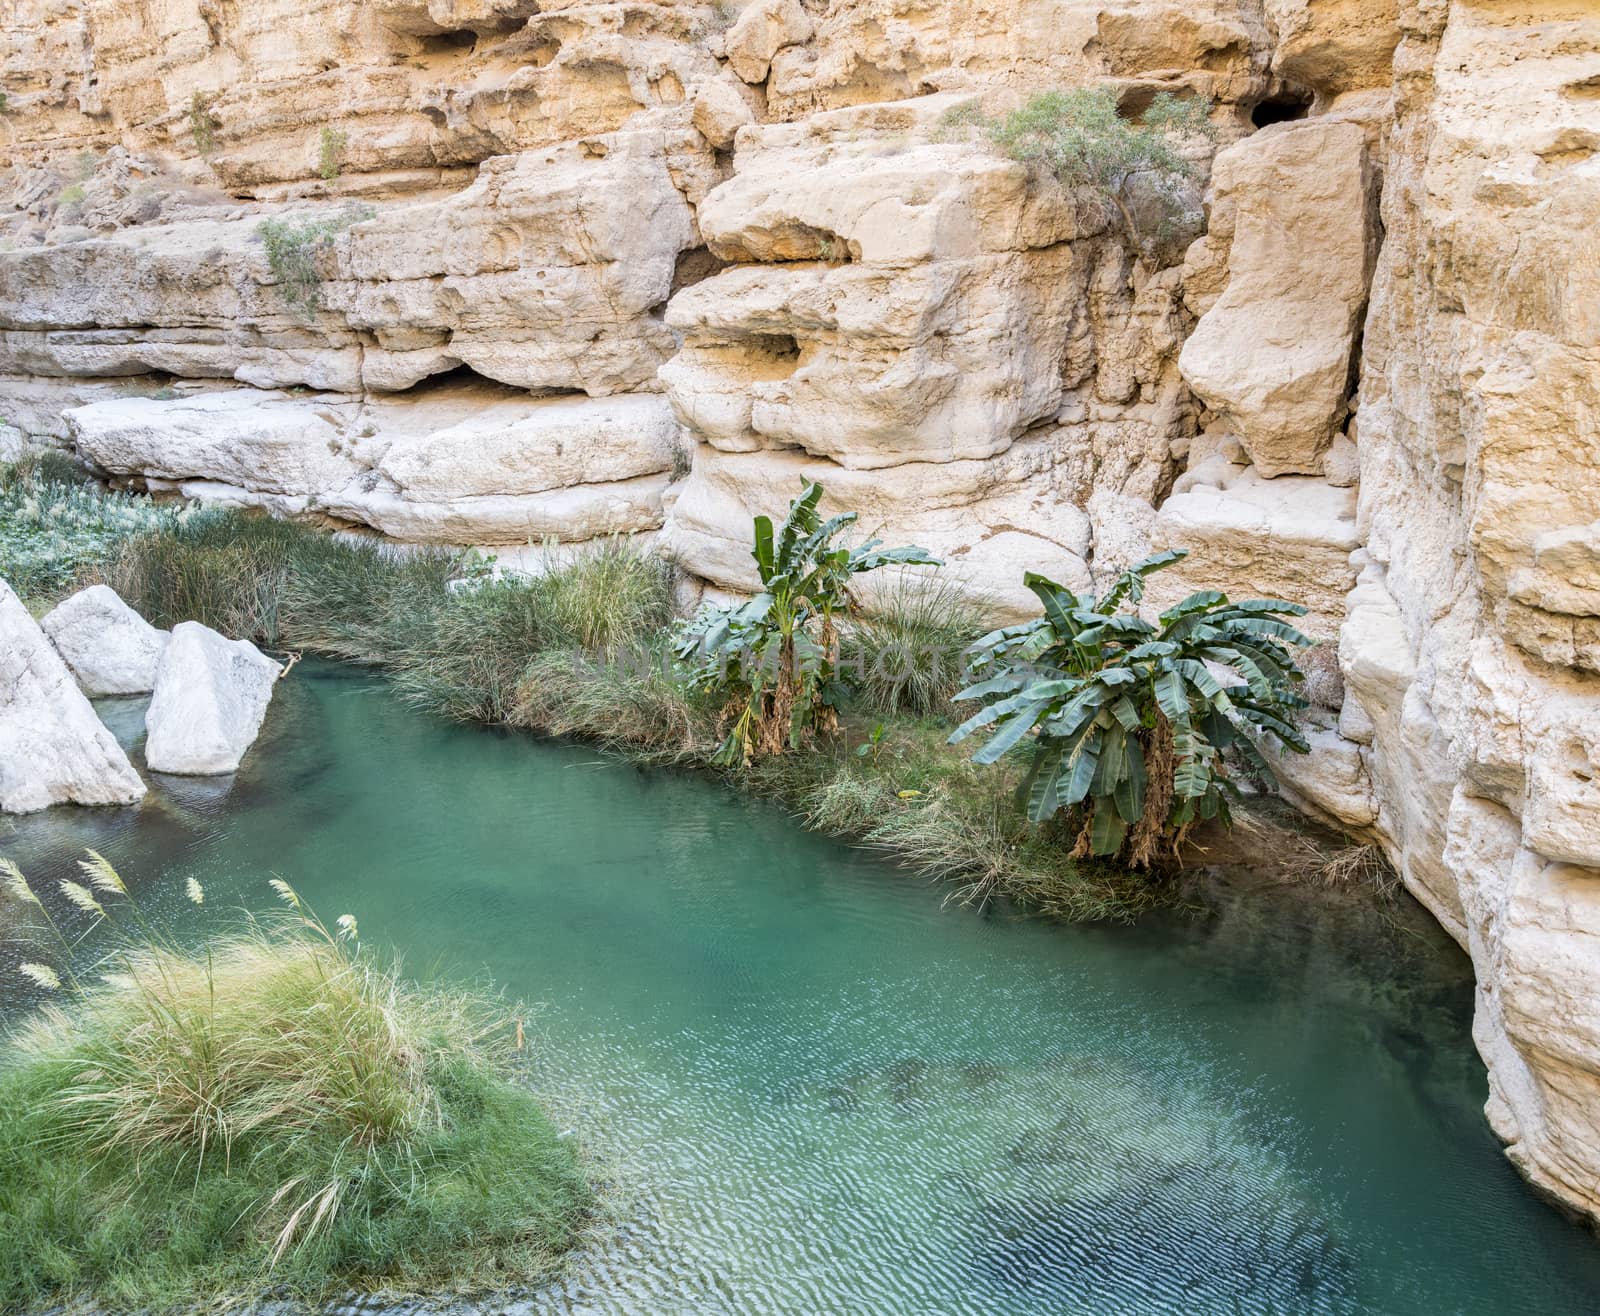 One natural pool in the canyon of the famous and touristic Wadi Shab, Tiwi, Sultanate of Oman, Middle East